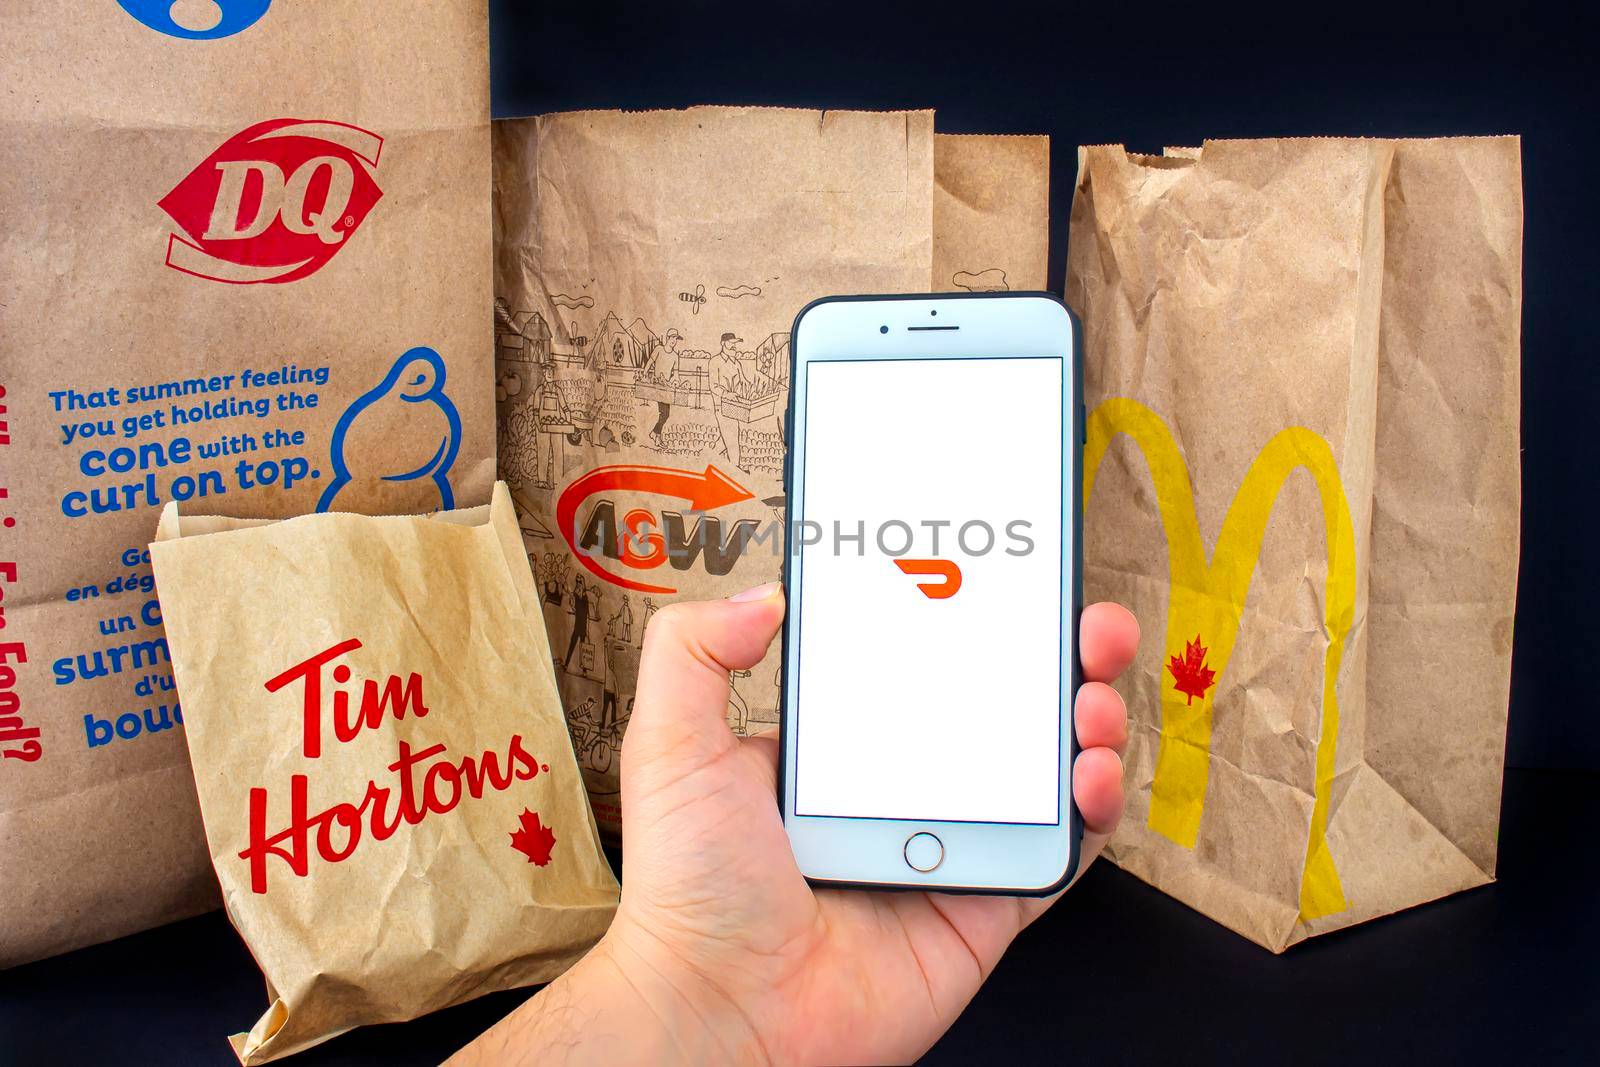 Calgary, Alberta. Canada. April 24, 2020: A person holding an iPhone Plus with the Door Dash application open with delivered food bags from Tim Hourtons, A&W, McDonals and DQ by oasisamuel